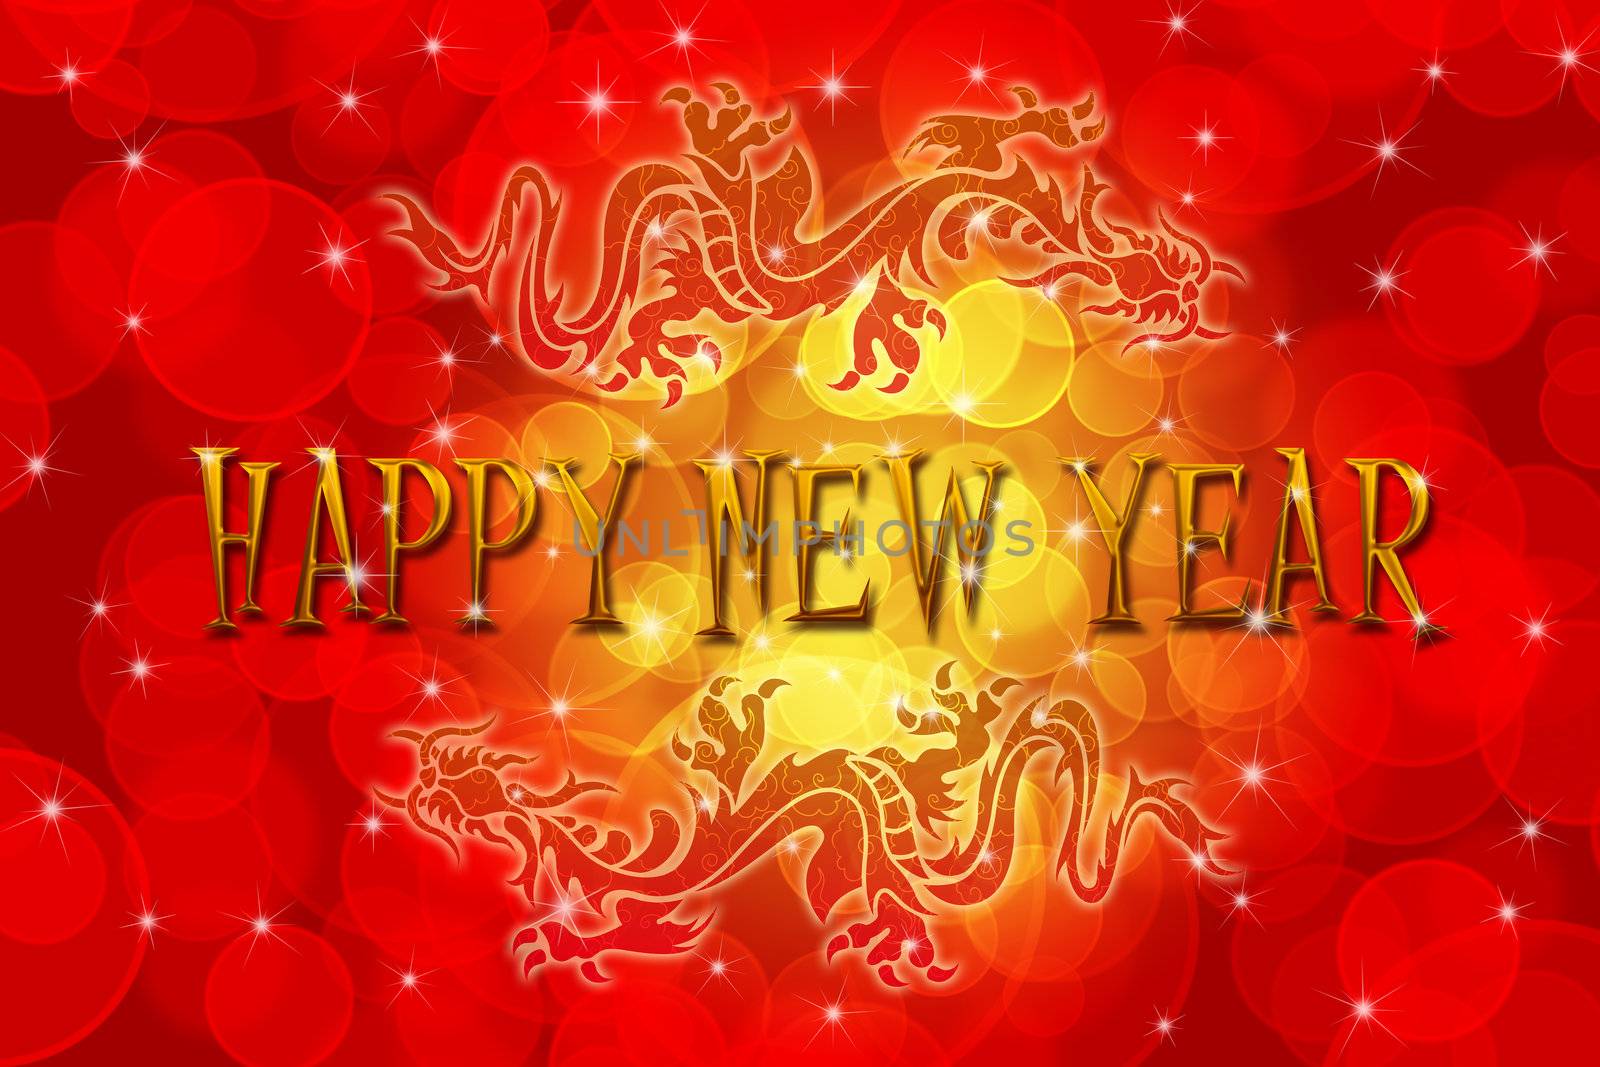 Double Chinese Dragon with Happy New Year Wishes by jpldesigns